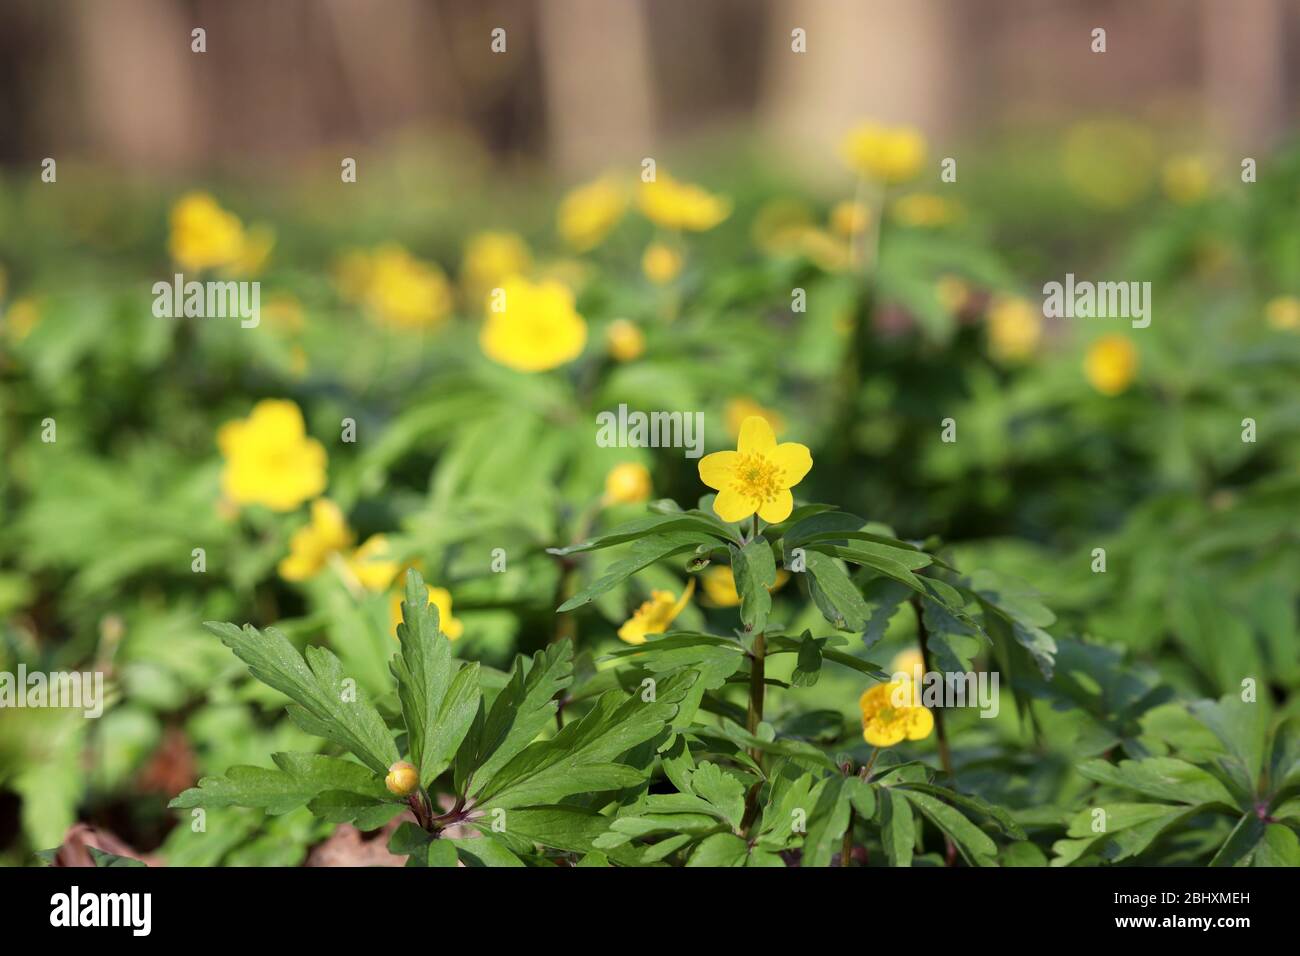 Yellow anemone buttercup in a forest. Spring wild flowers with leaves Stock Photo